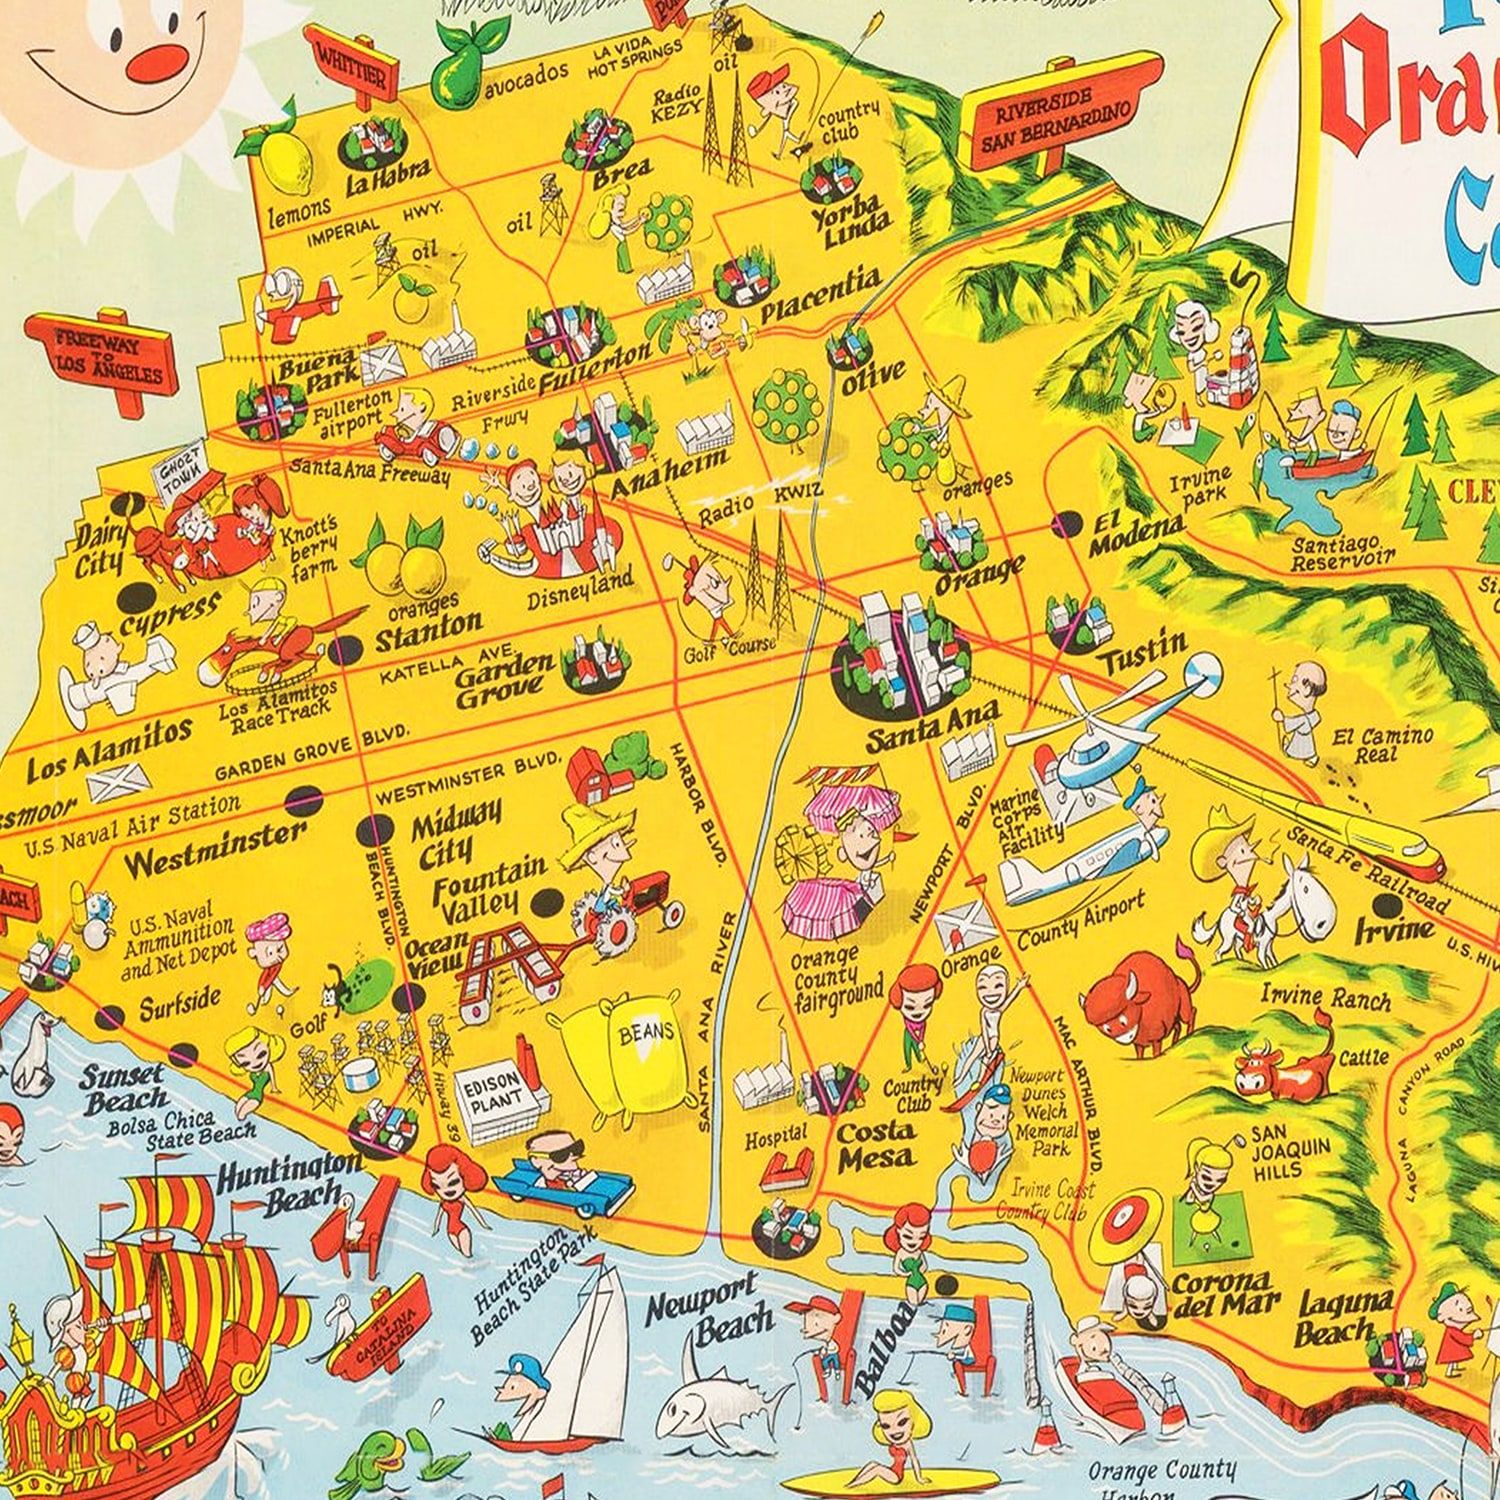 Vintage Map of Orange County, California 1957 by Ted's Vintage Art